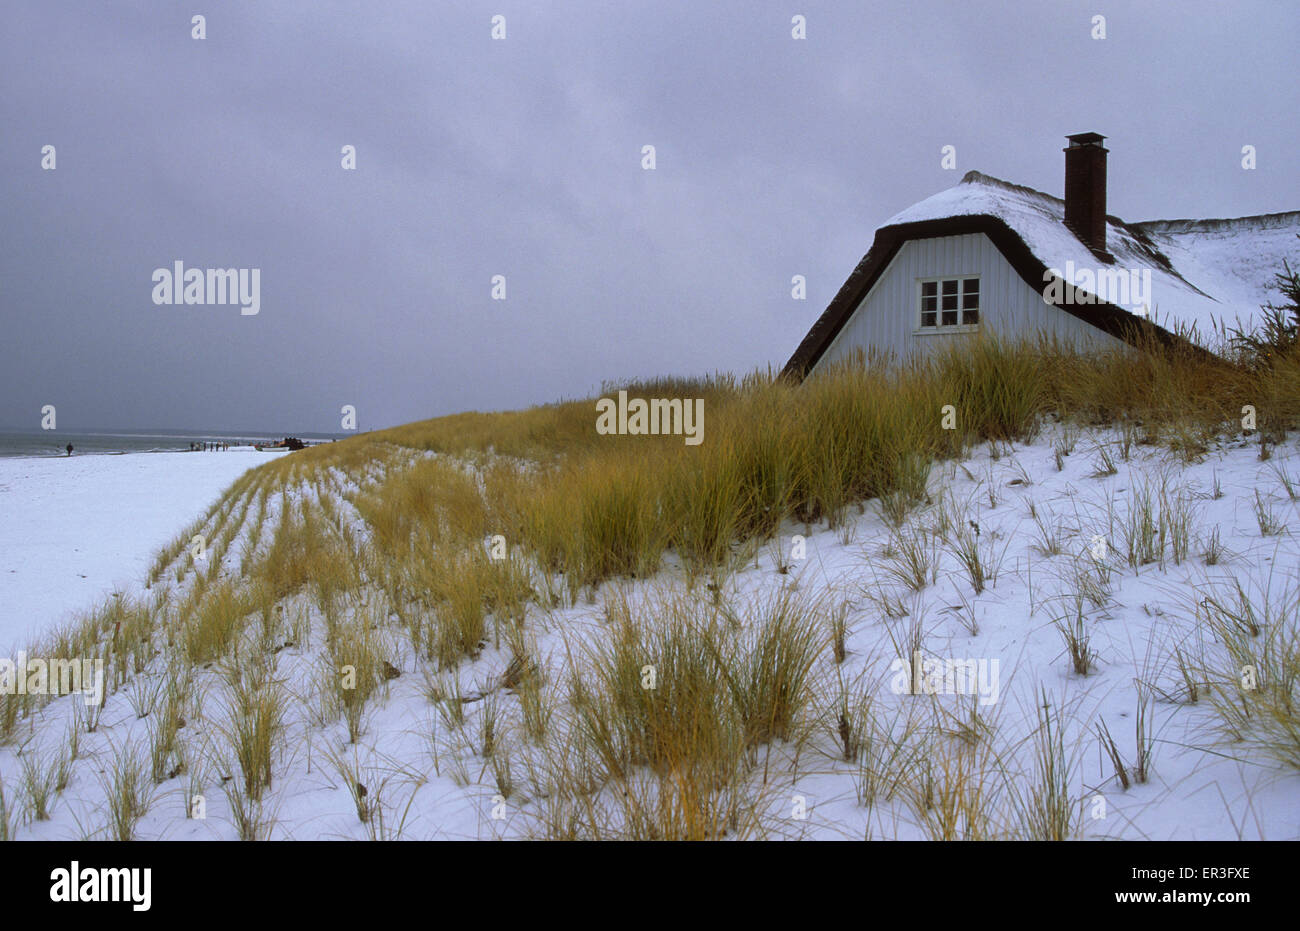 Europe, Germany, Mecklenburg-Western Pomerania, Ahrenshoop at the Baltic Sea, house at the beach.  Europa, Deutschland, Mecklenb Stock Photo